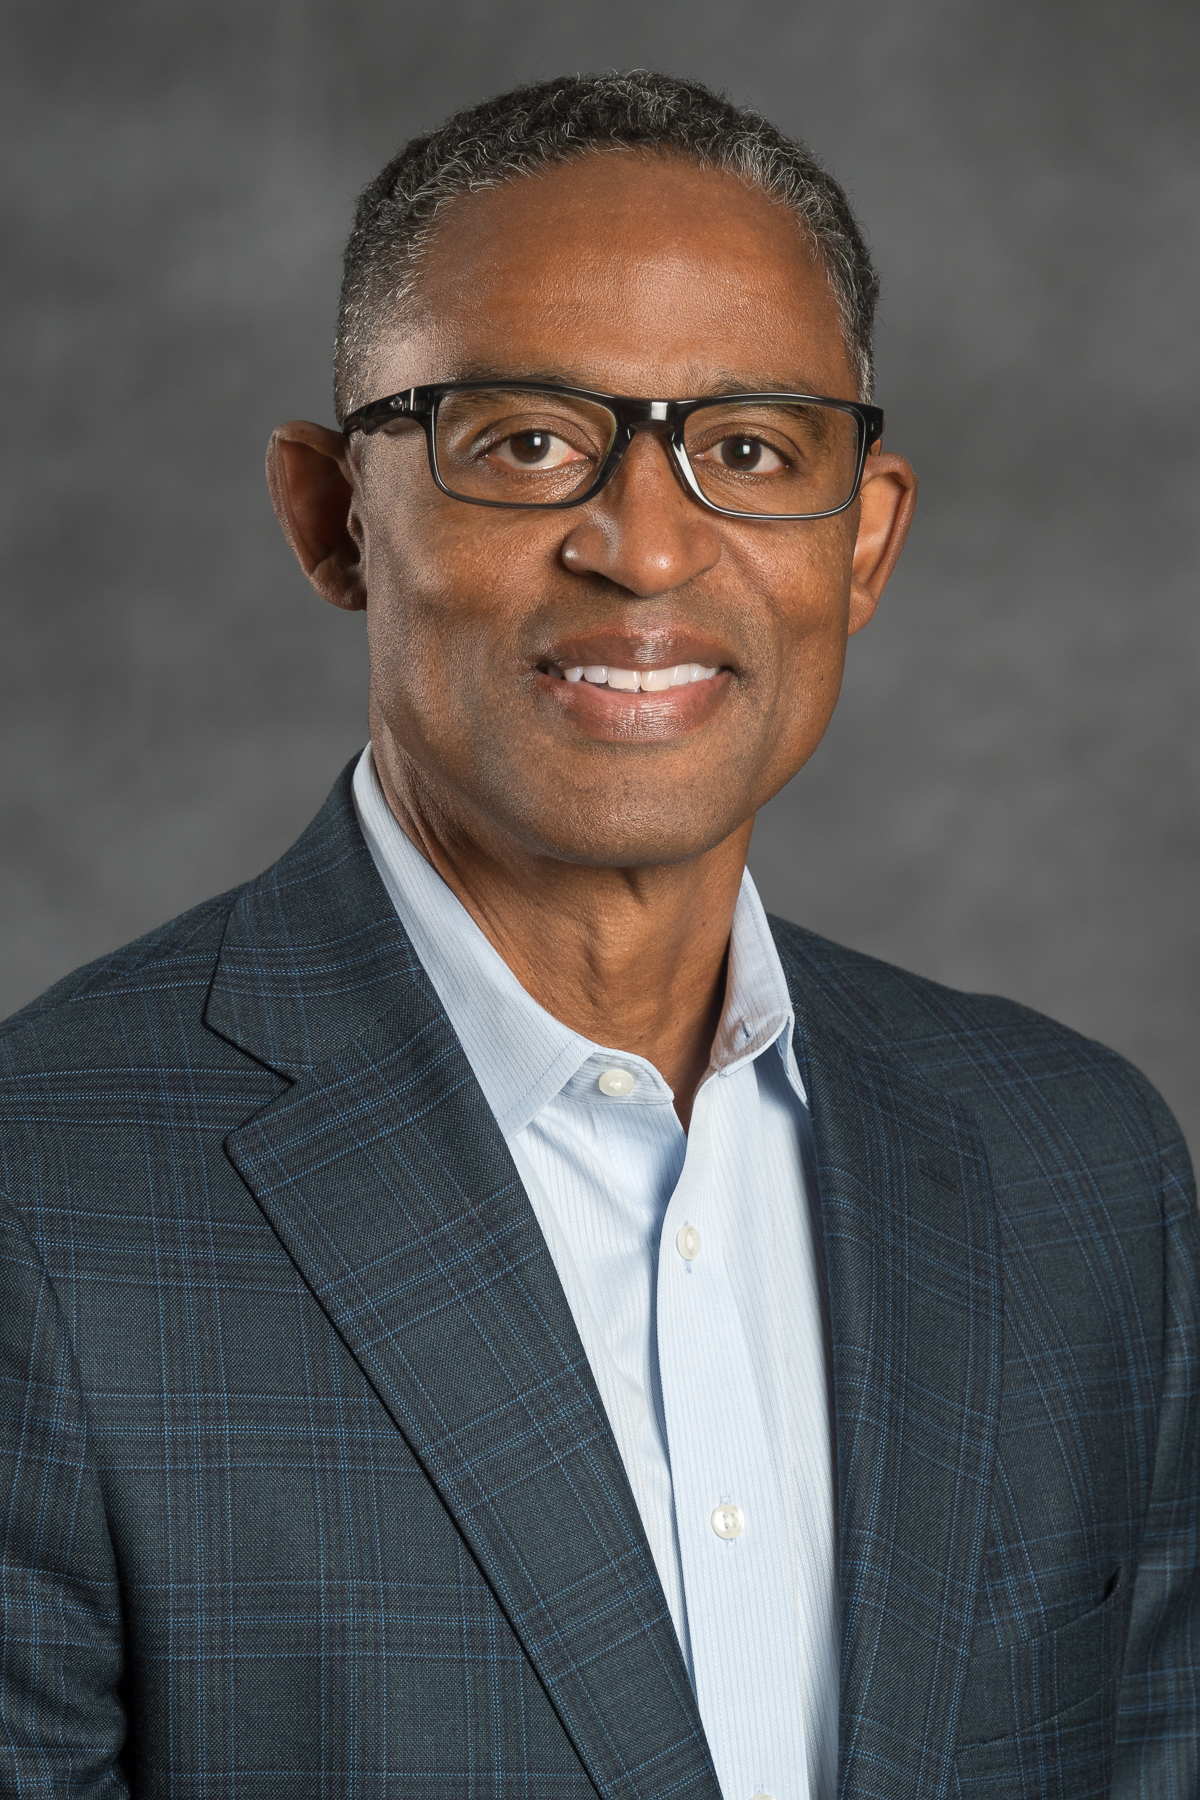 This photograph is a portrait of Brian Brown, the new interim dean of the VCU School of Business.